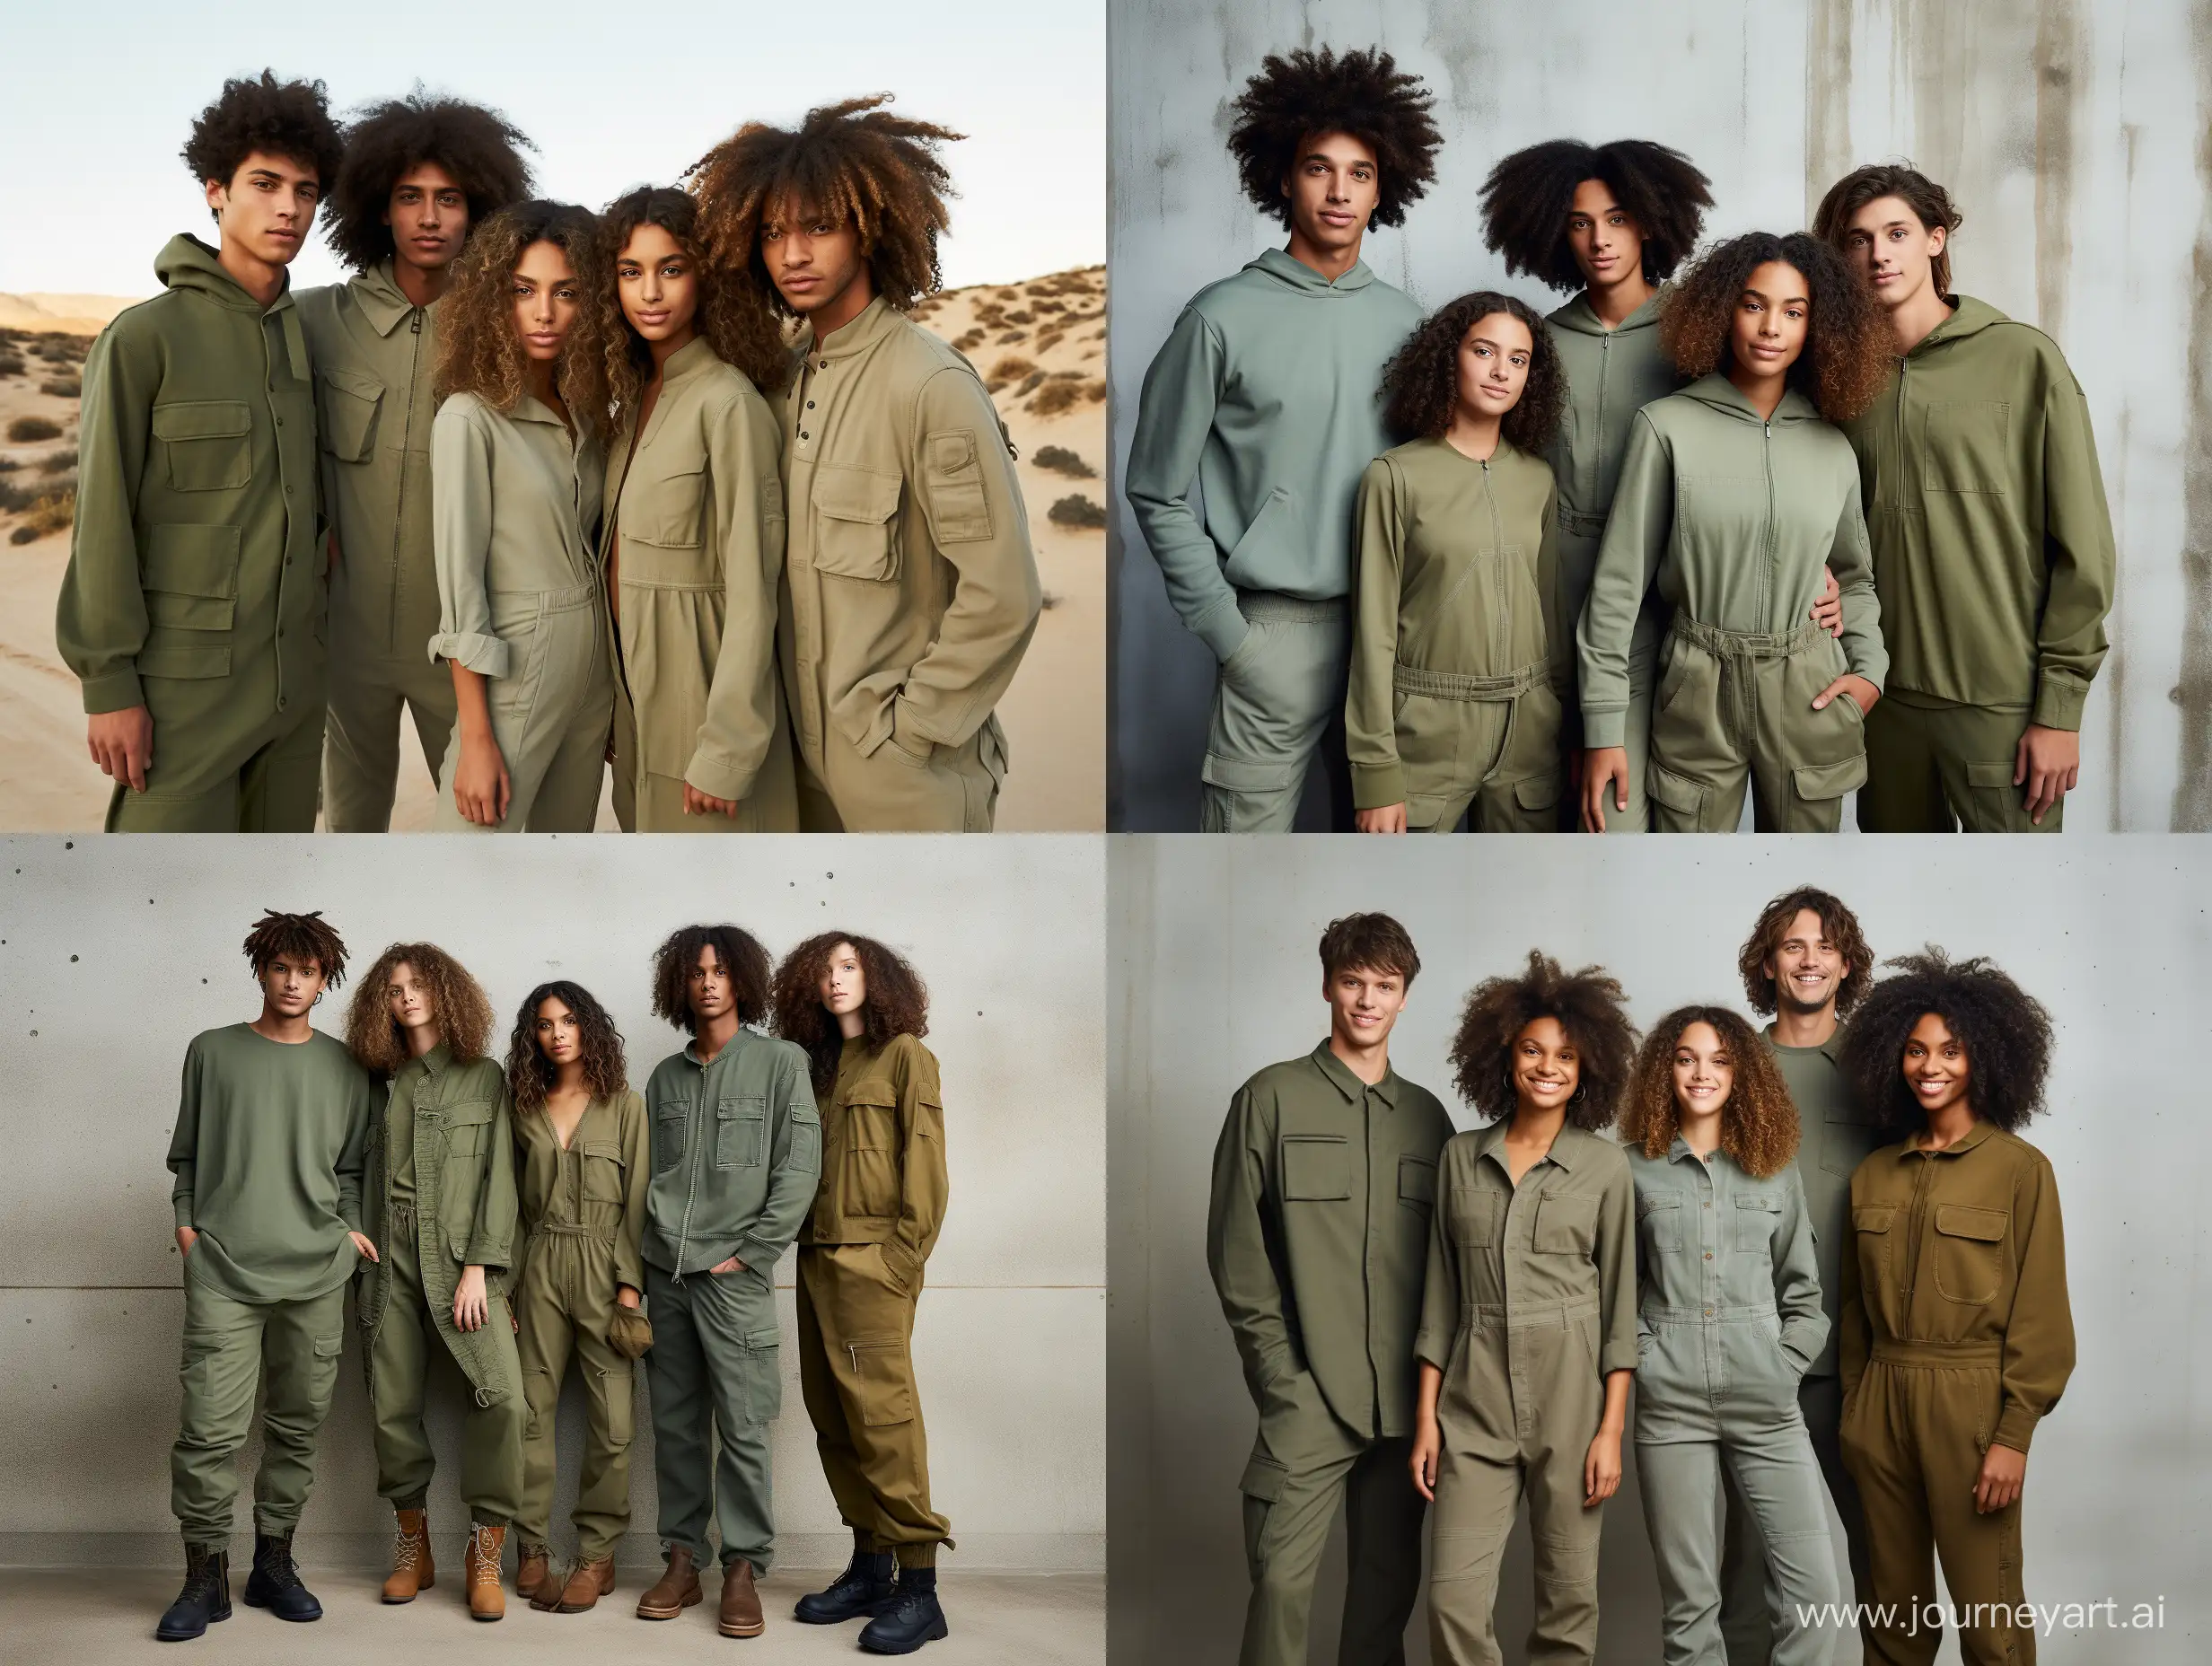 a group with a man, woman, girl, boy and a teenager standing next to each other, green and brown clothes, natural muted tones, utilitarian, 2 0 2 0 fashion, earthy colours, muted colors. ue 5, flight suit, earthy tones, jumpsuit, jumpsuits, subtle earthy tones, air force jumpsuit, green clothing, muted green, modern earthy neutral earthy, green clothes, jumpsuits with zips between the limbs and overalls in recycled plastic, linen or organic cotton, mannequins with realistic skin texture.  black and white colors, casual clothe style
